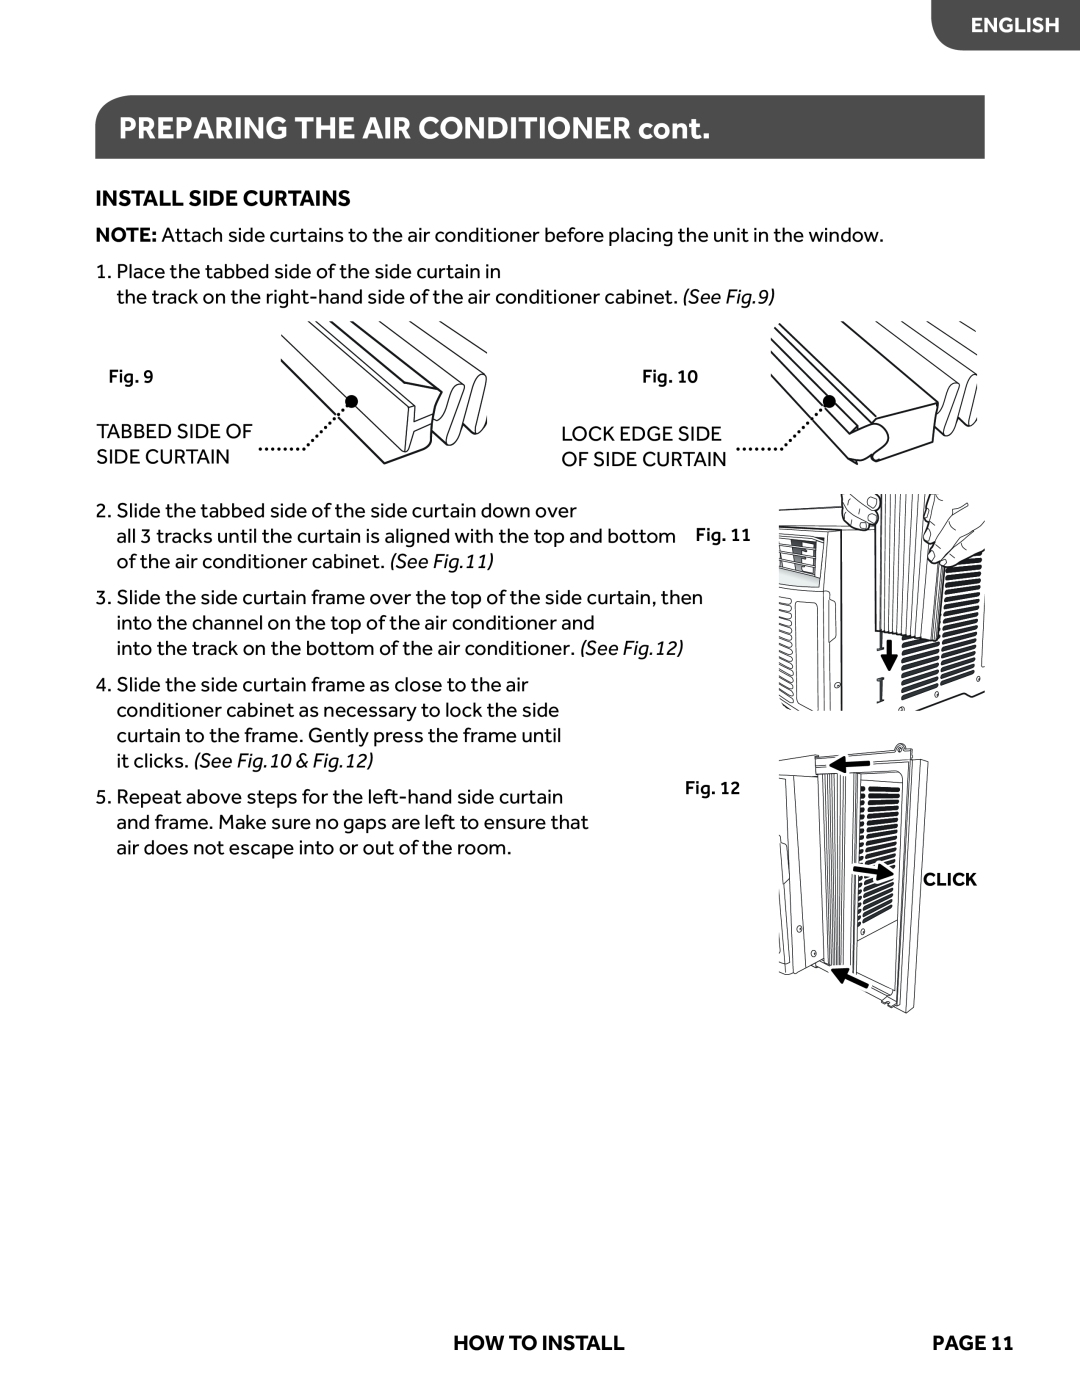 Haier HWF05XCL manual PREPARING THE AIR CONDITIONER cont, Install Side Curtains, English, How To Install 